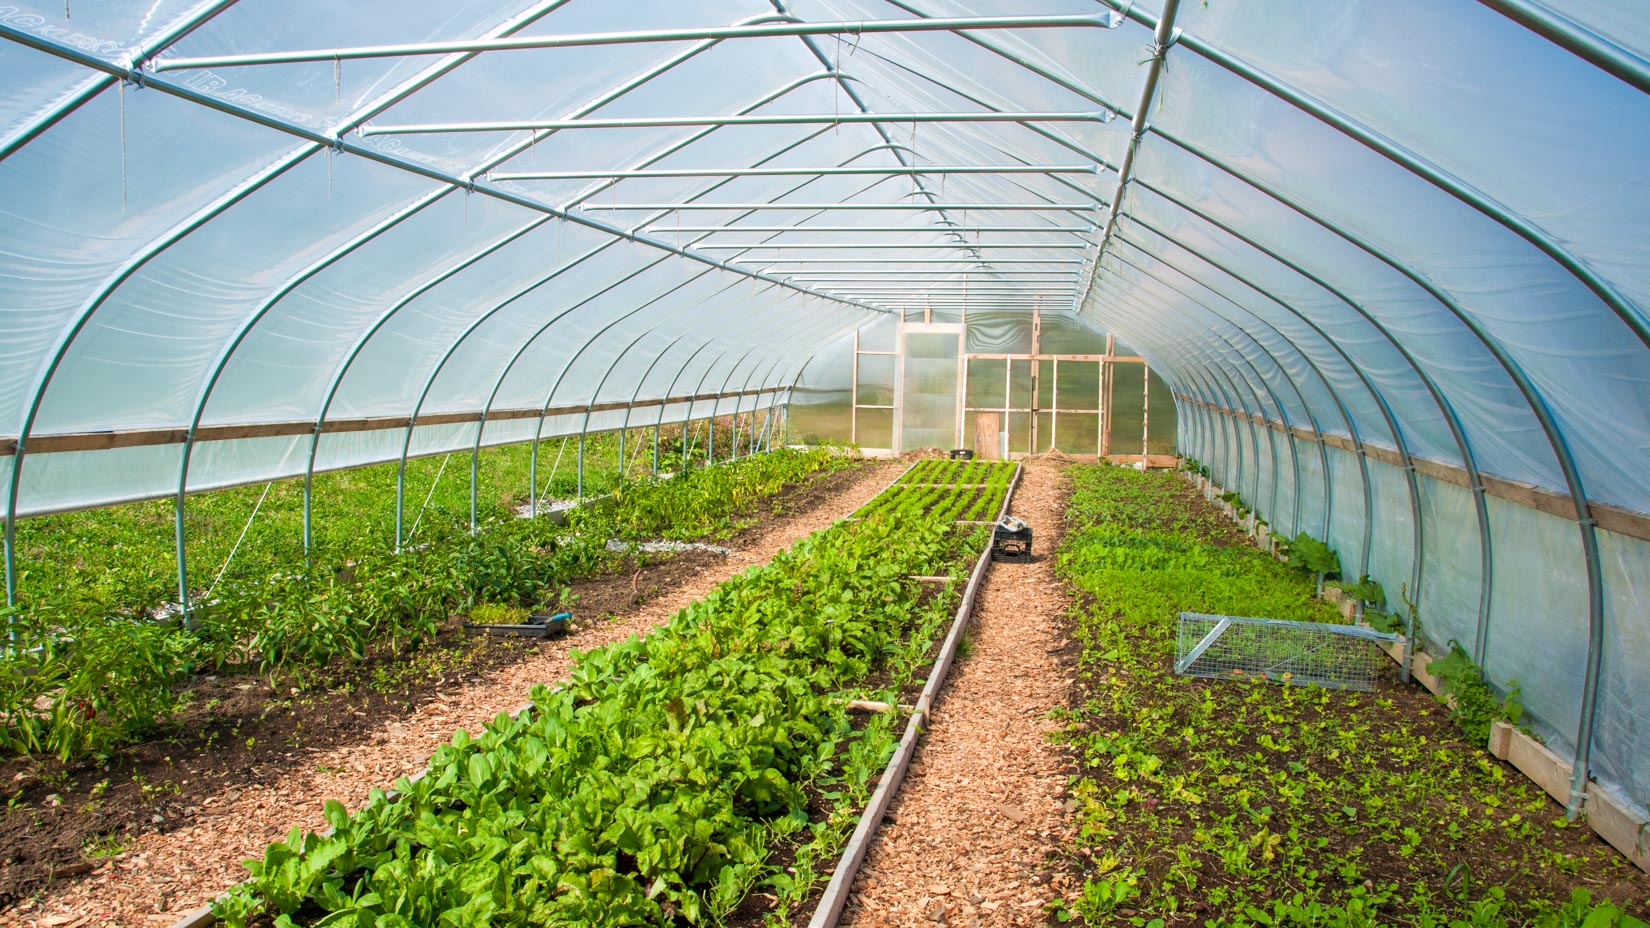 A high tunnel for growing vegetables.